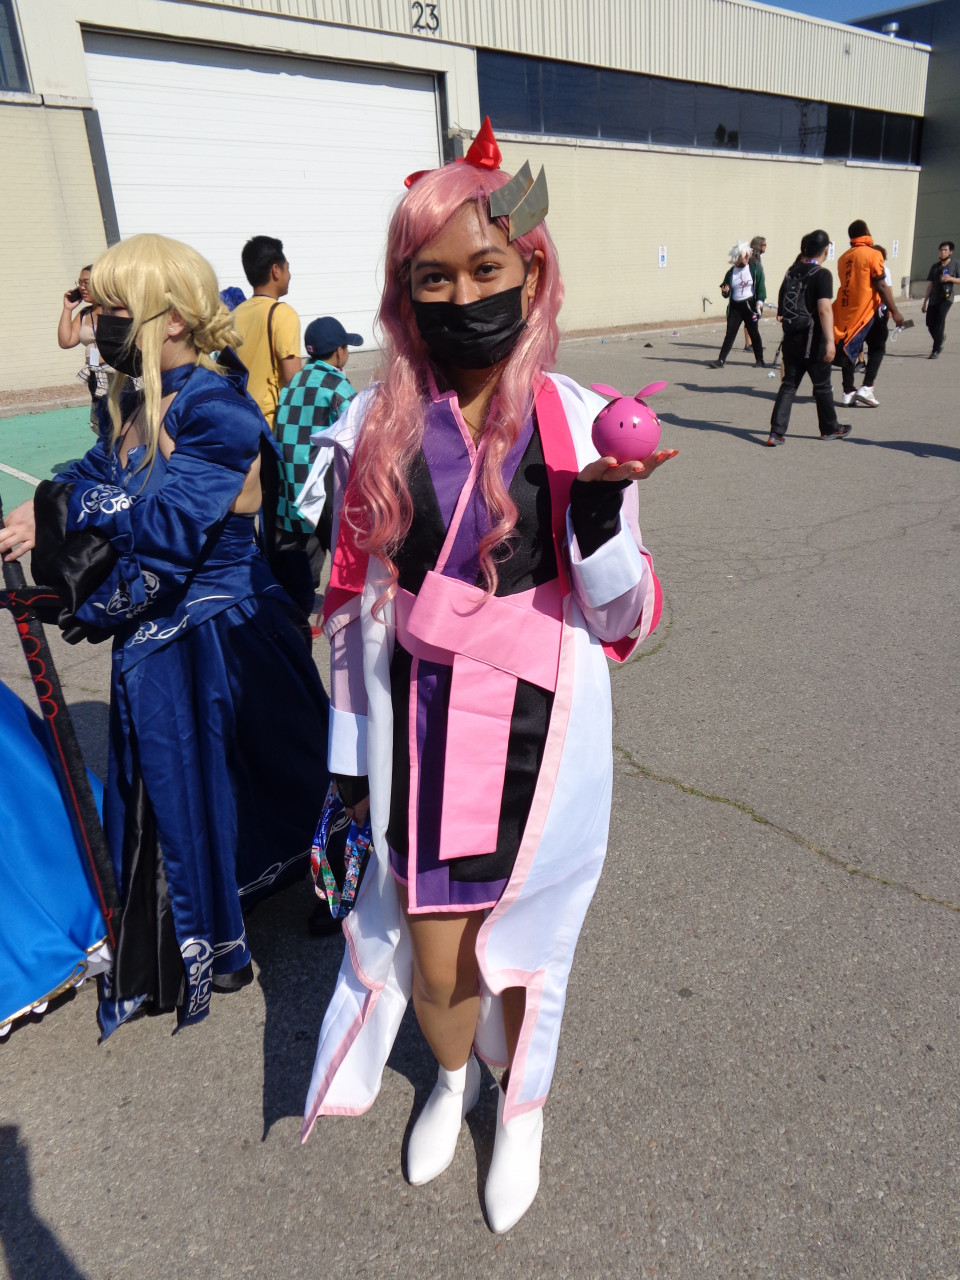 Japanese cosplay and anime get the spotlight in Toronto